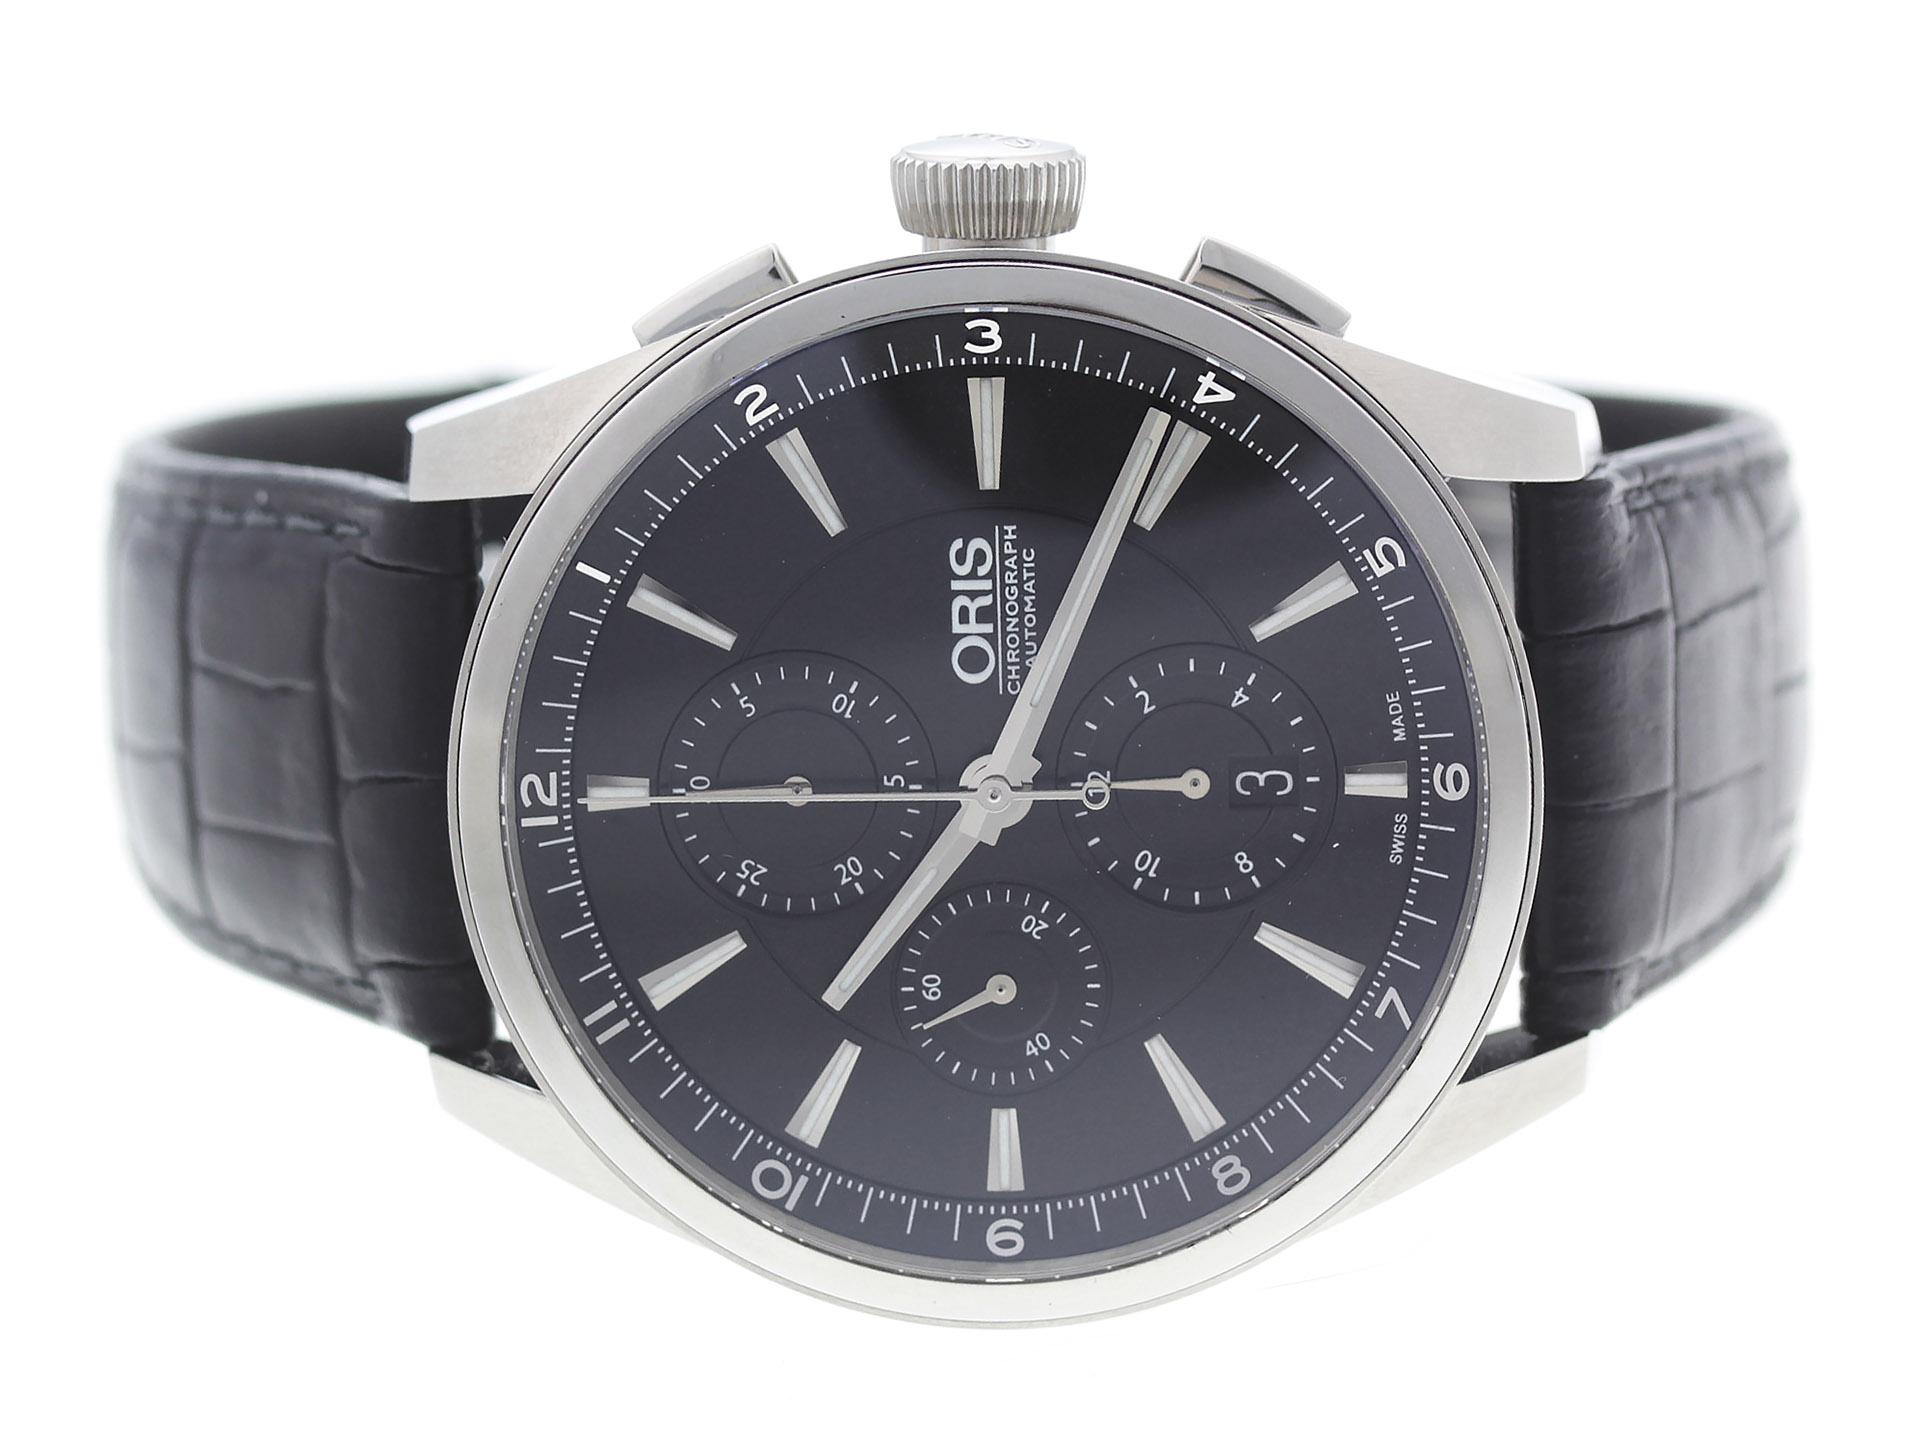 Stainless steel w/ black leather strap Oris Artix 01 674 7644 4054-07 5 22 81FC watch, water resistance to 100m, chronograph, with date.

Watch	
Brand:	Oris
Series:	Artix
Model #:	01 674 7644 4054-07 5 22 81FC
Gender:	Men’s
Condition:	Excellent